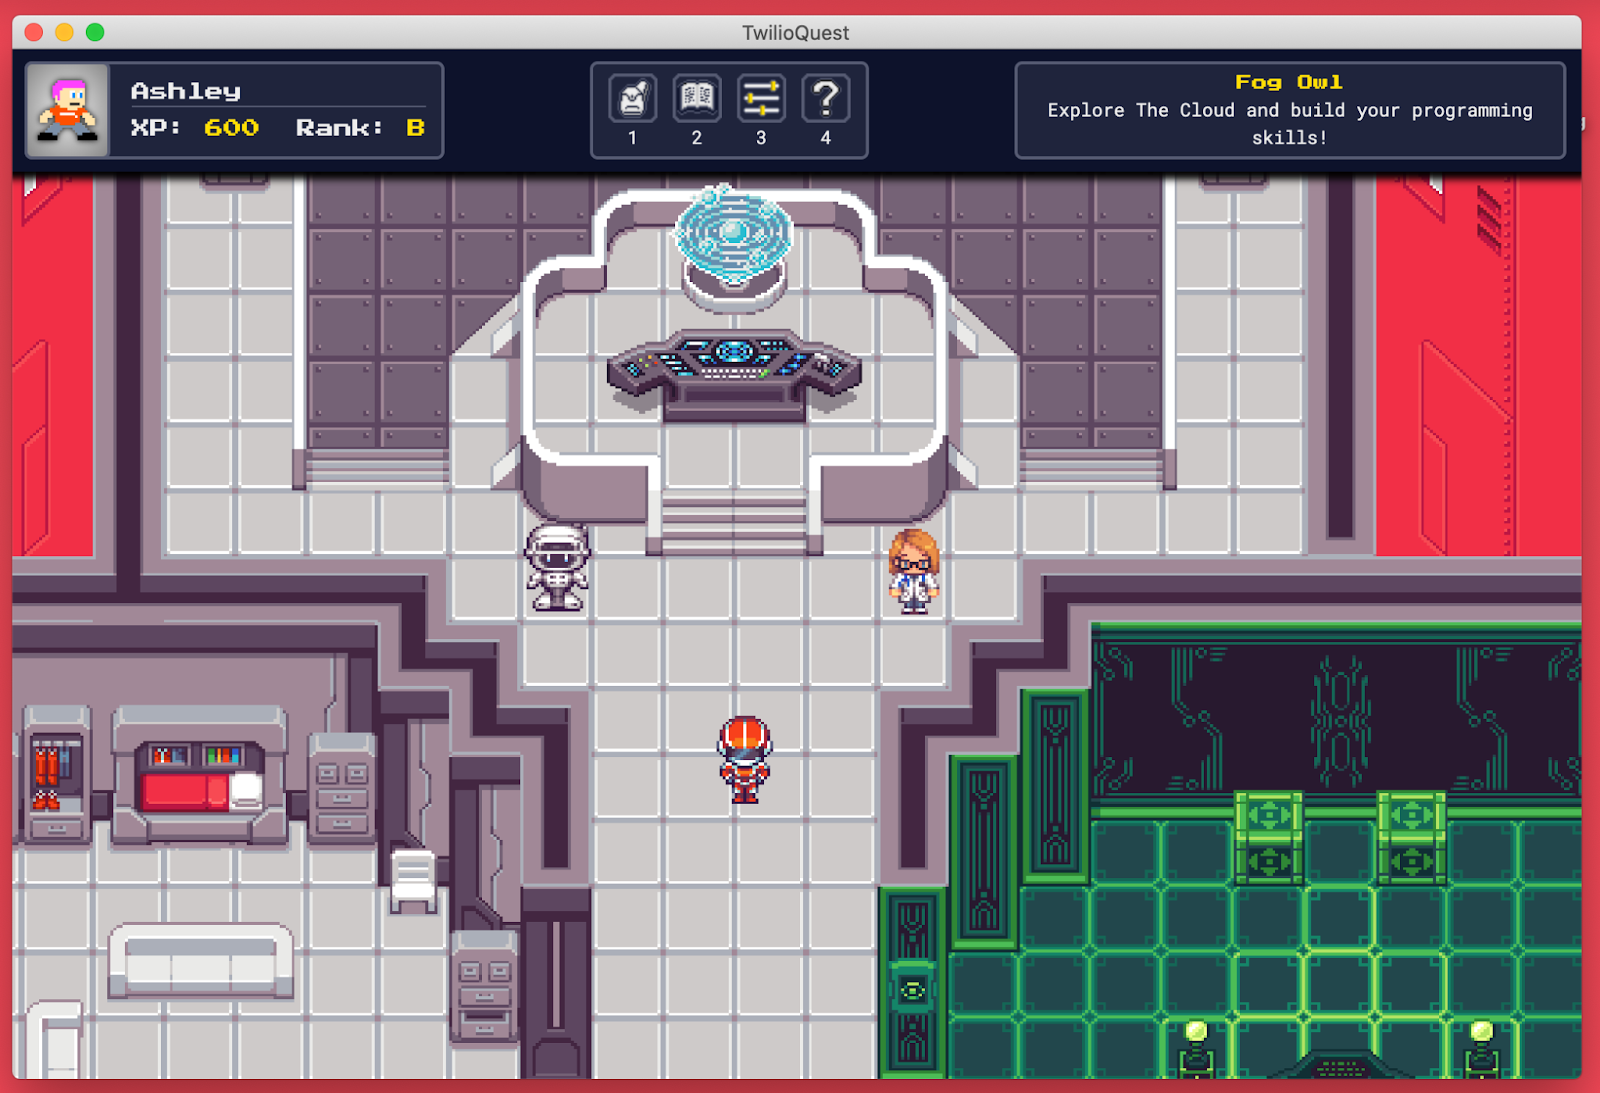 Screenshot of the TwilioQuest game, showing my TwilioQuest avatar centered inside the Fog Owl